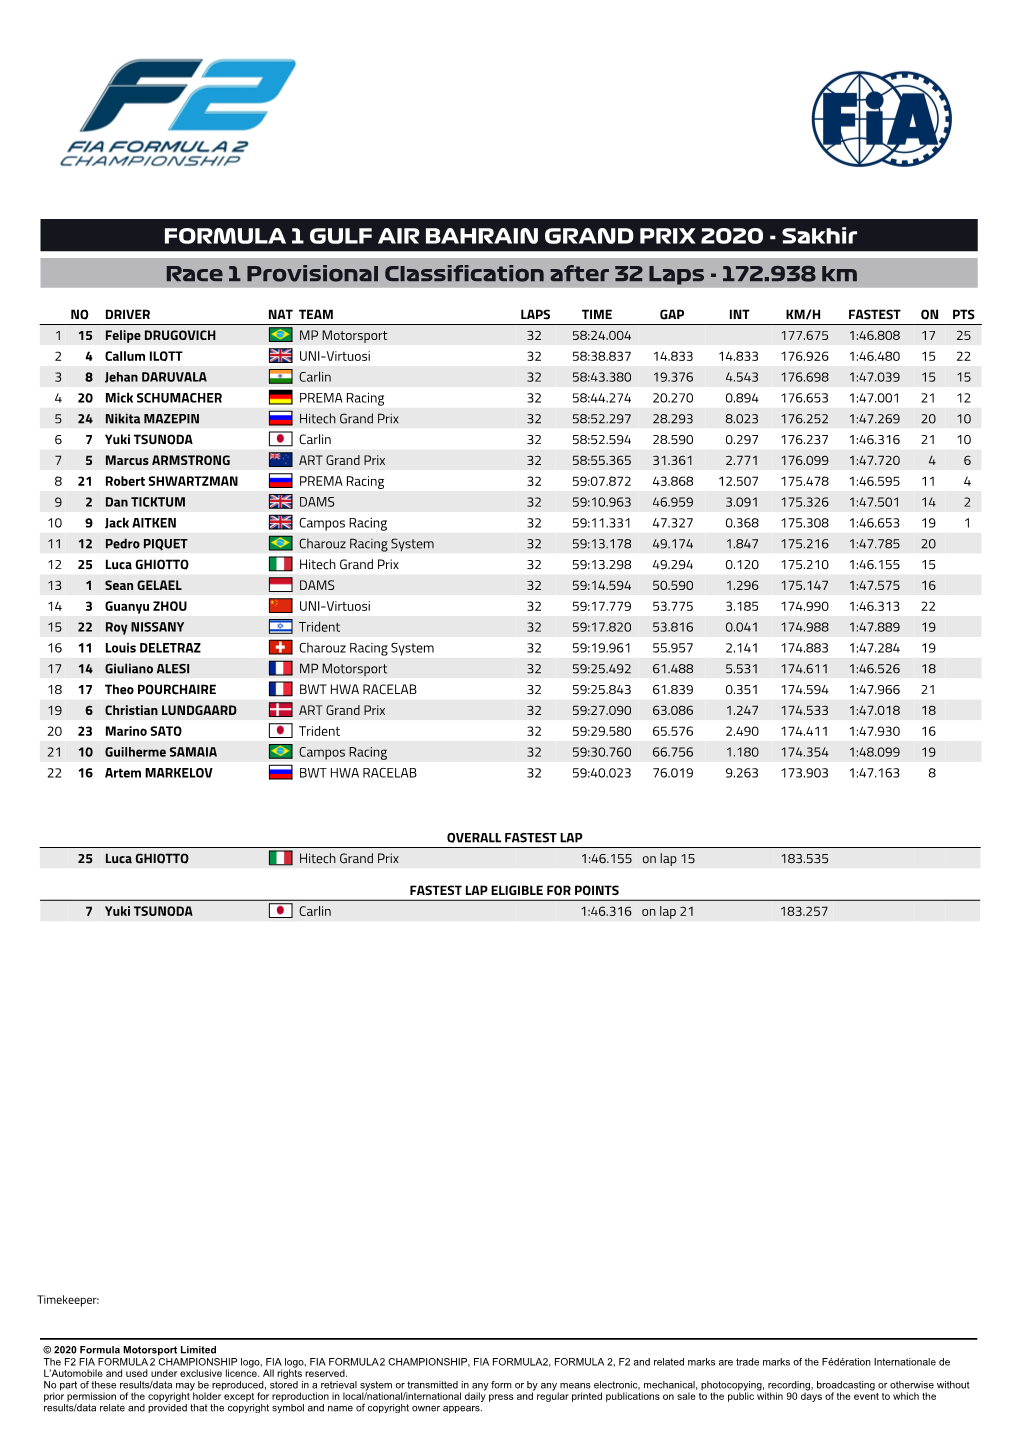 Sakhir Race 1 Provisional Classification After 32 Laps - 172.938 Km